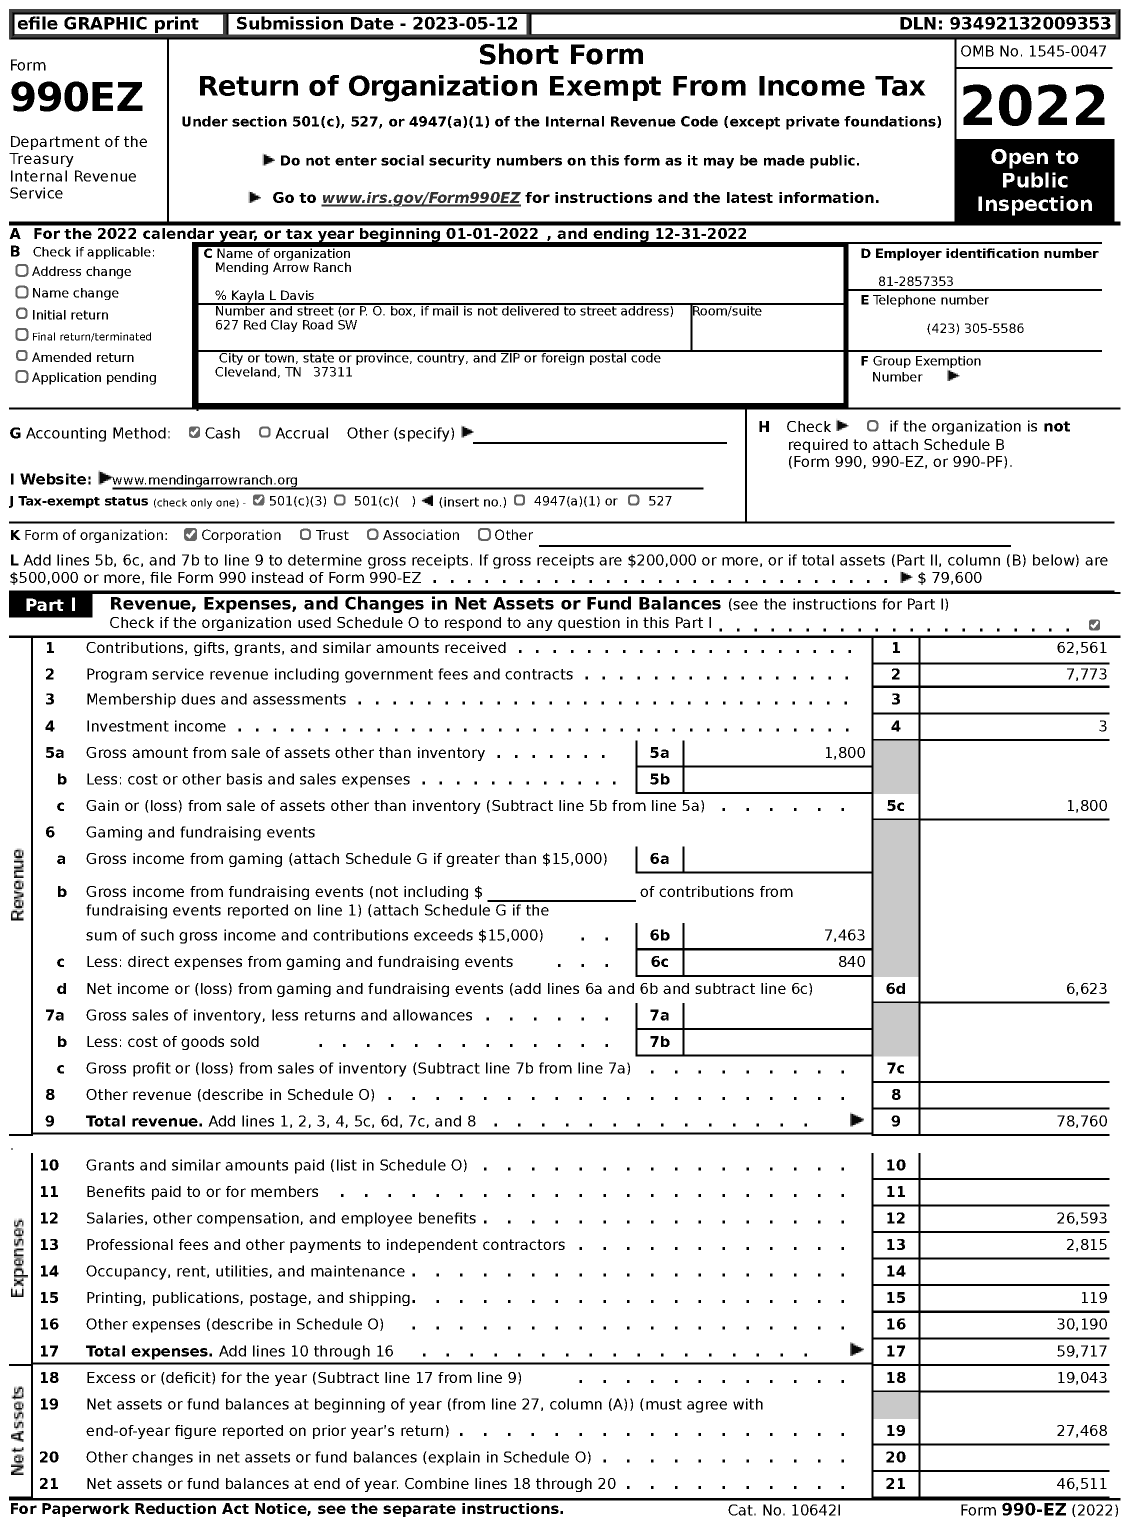 Image of first page of 2022 Form 990EZ for Mending Arrow Ranch